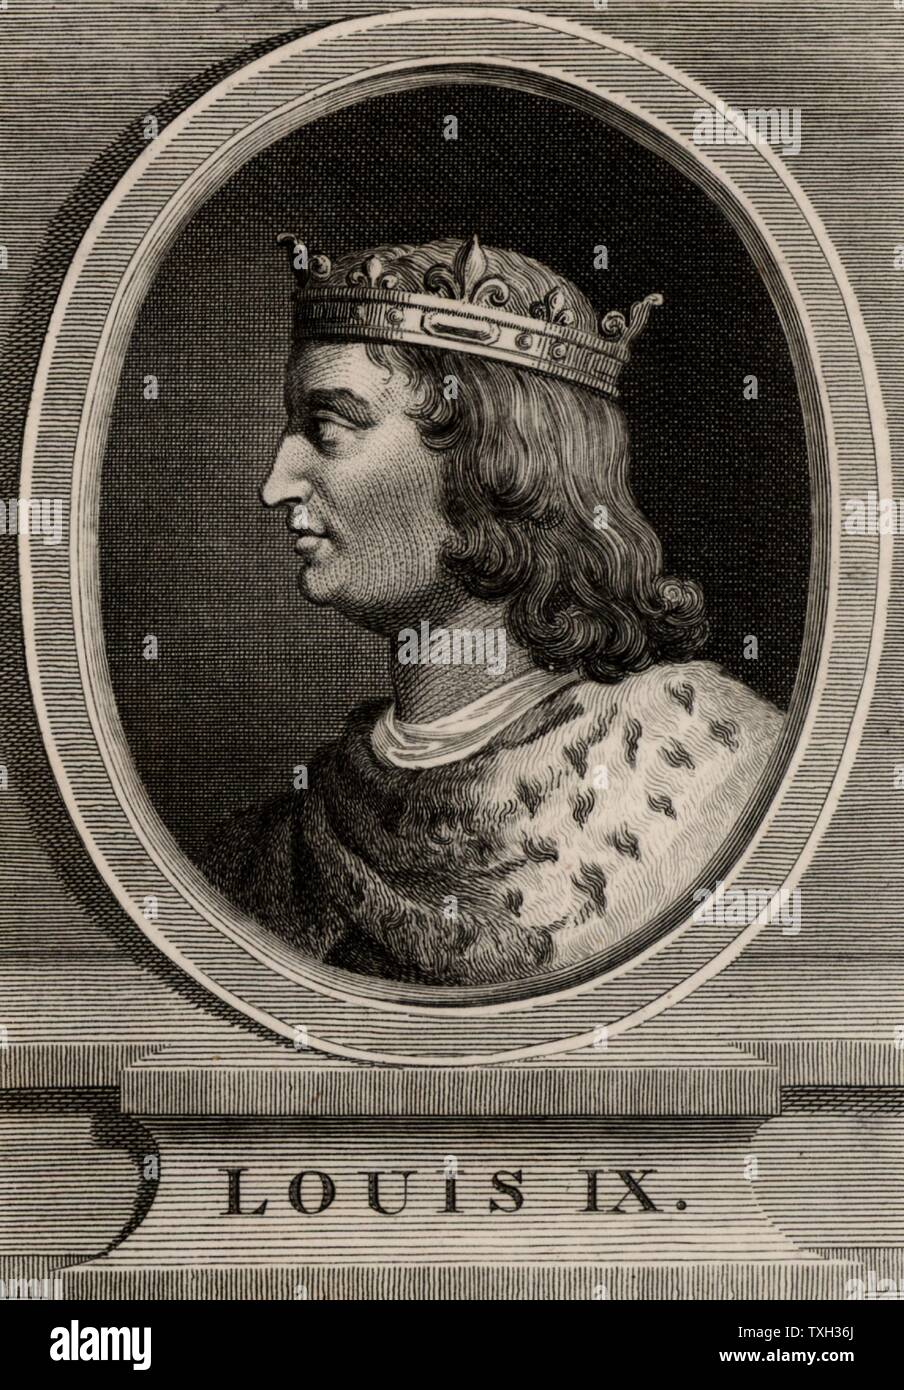 Louis IX known as St Louis (1215-70) a member of the Capetian dynasty, king of France from 1226. In 1249 on the 7th Crusade Louis was captured and was ransomed in 1250.  In 1270 embarked on the 8th Crusade and died of plague at Tunis. Copperplate engraving, 1793. Stock Photo